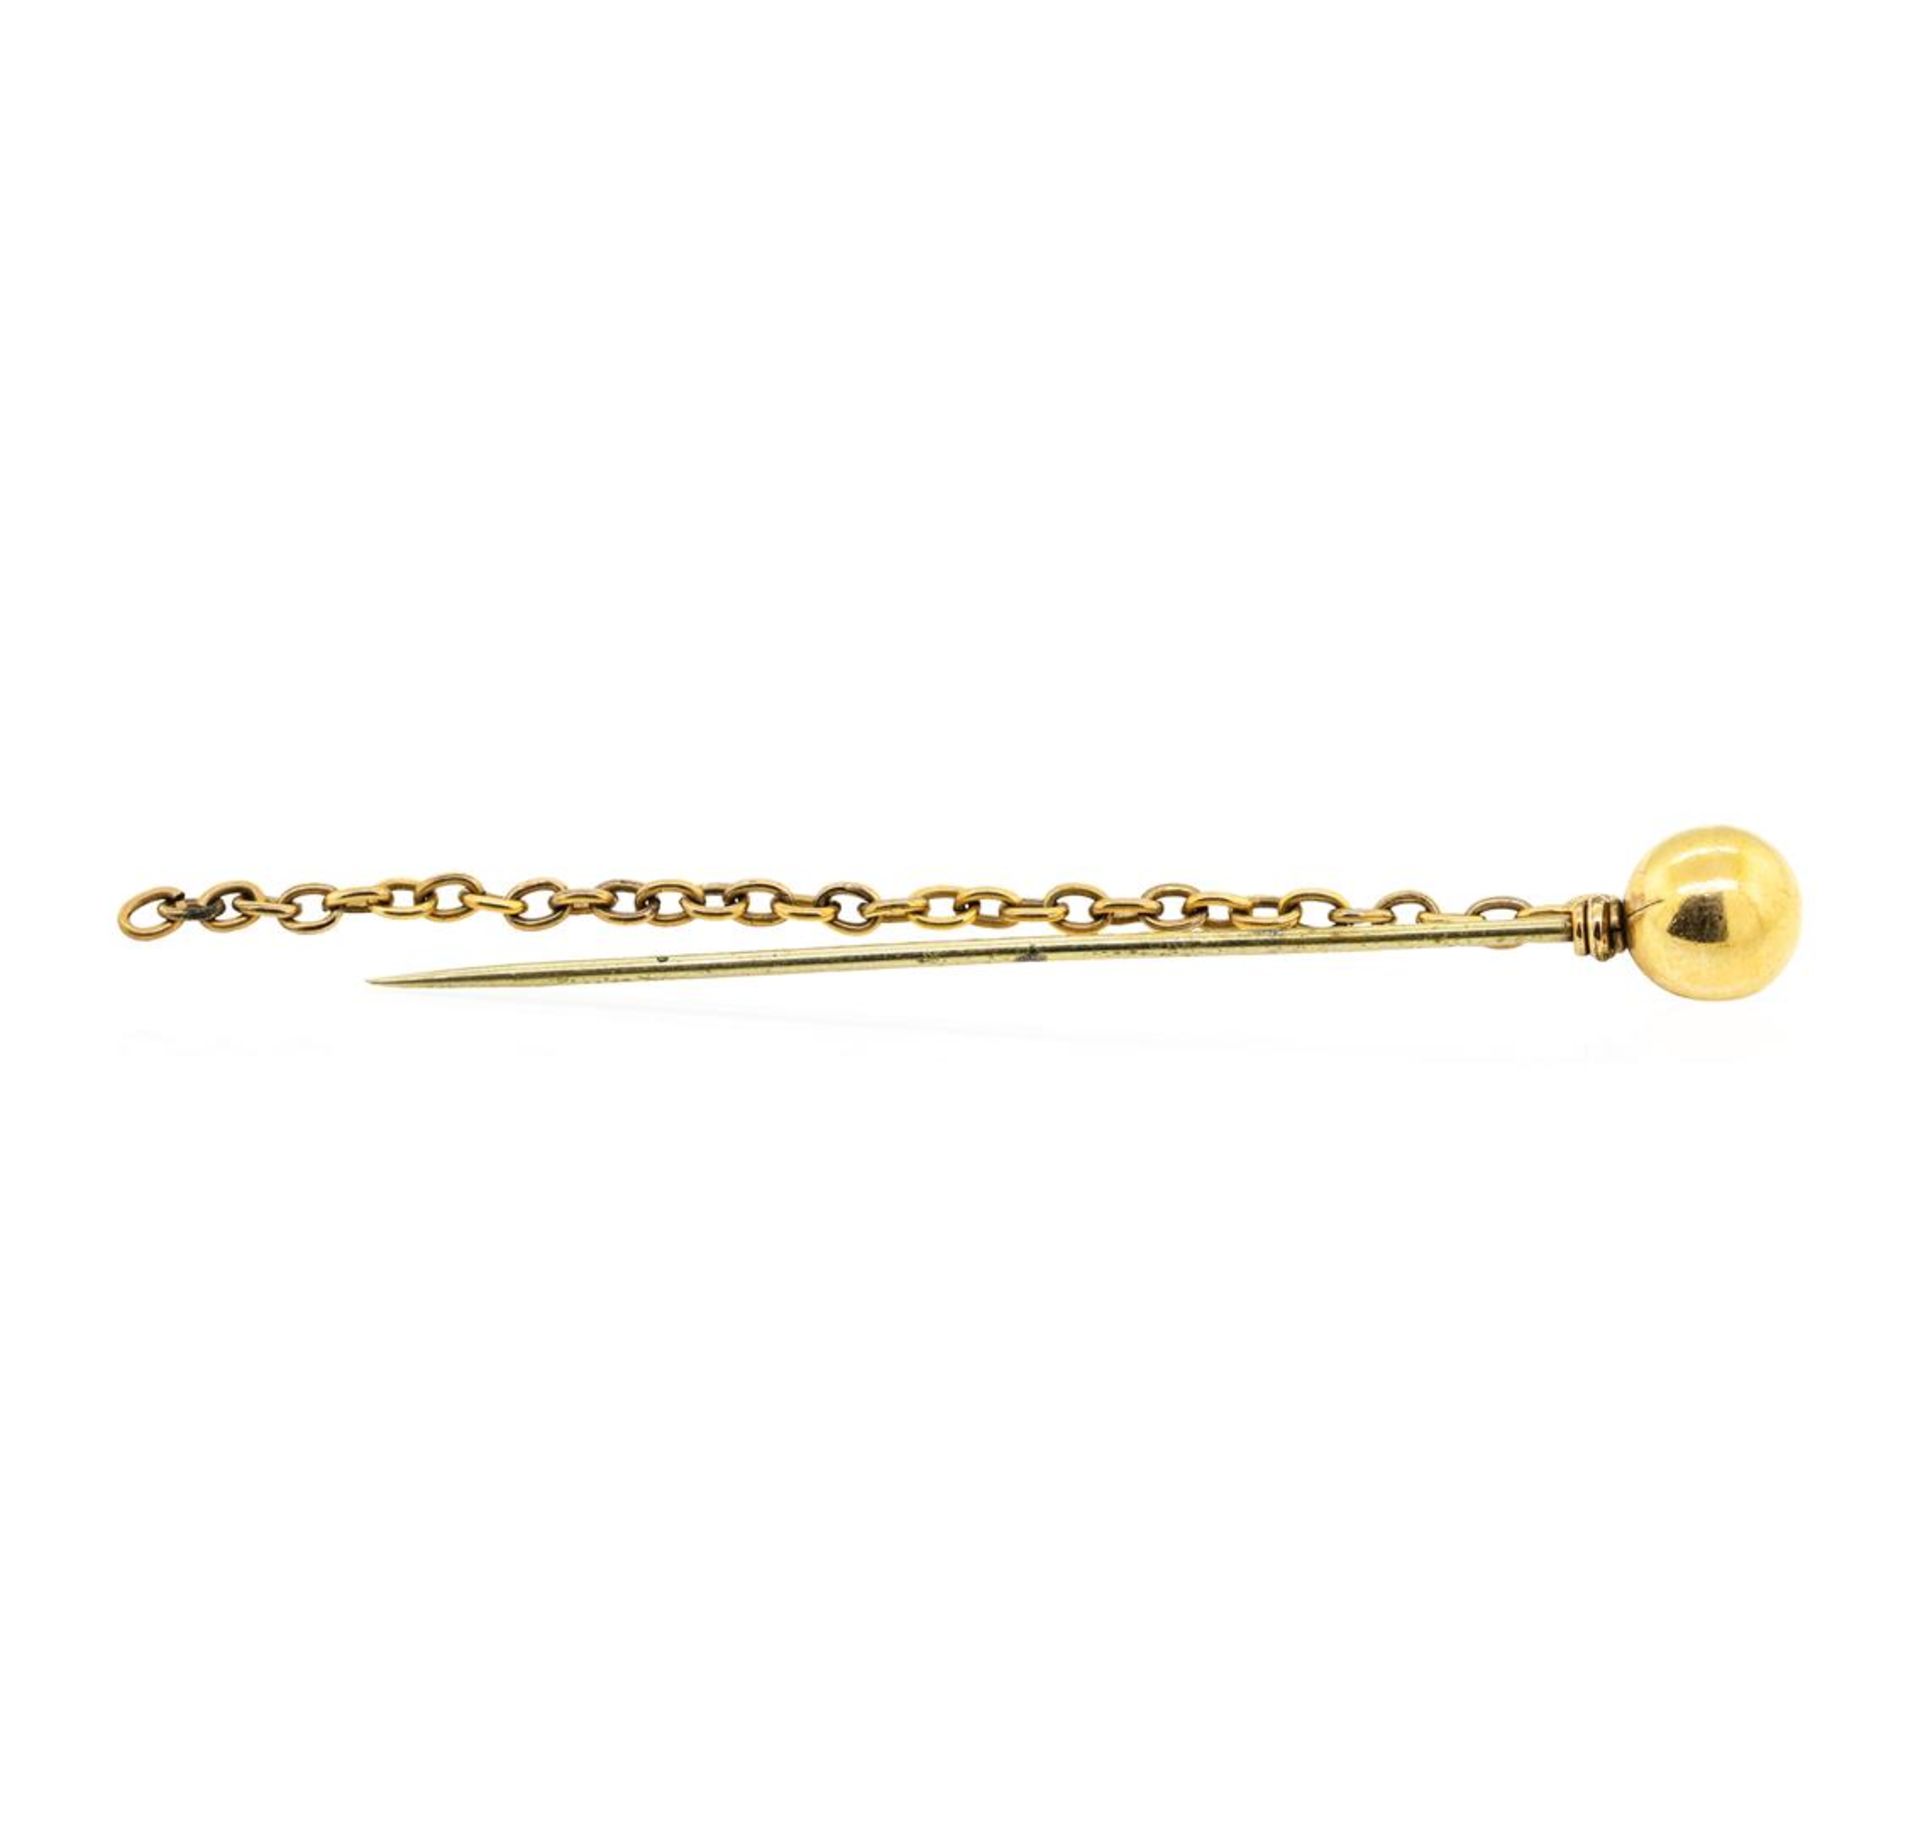 Ball and Chain Stick Pin - Yellow Gold Plated - Image 2 of 2